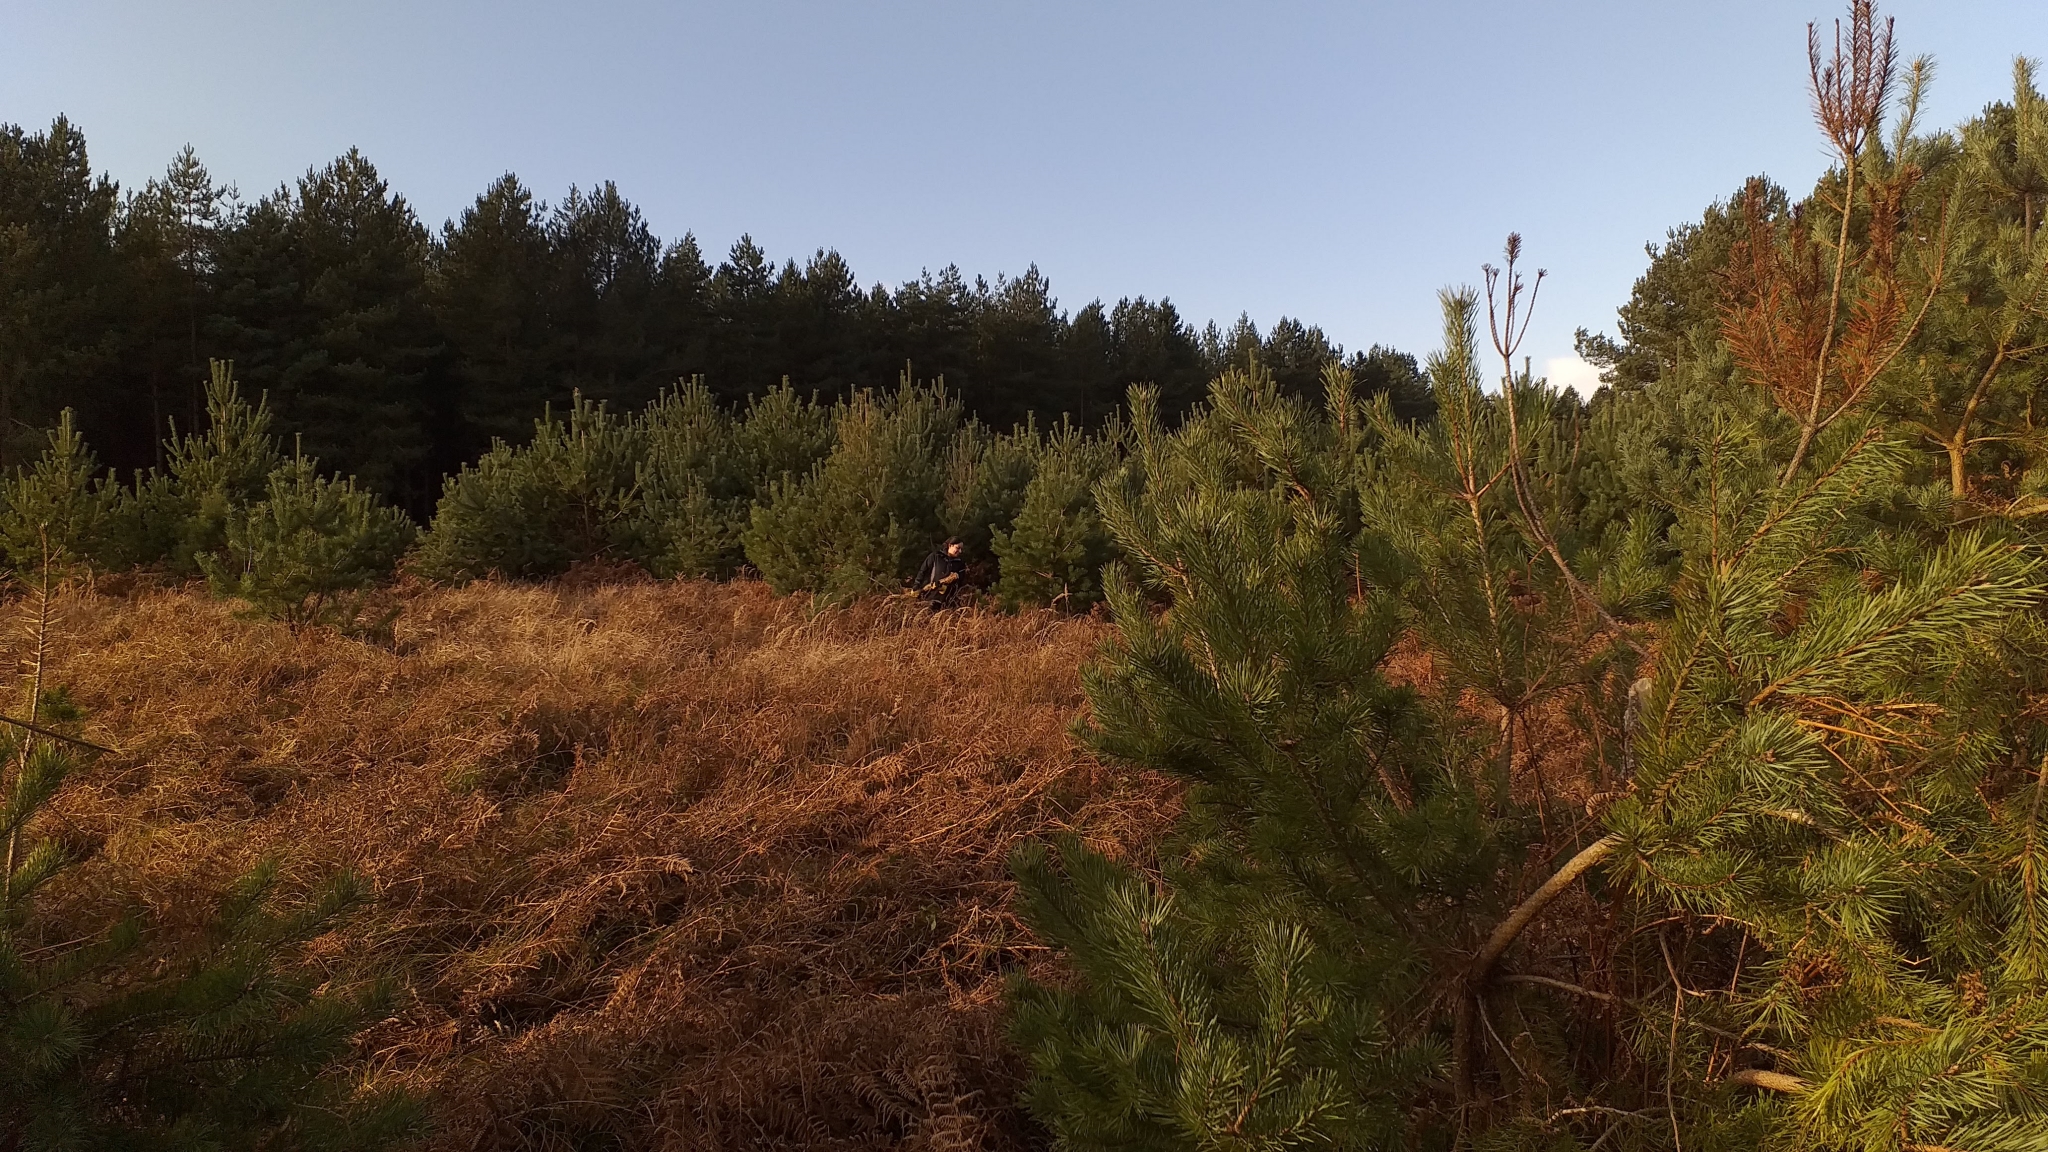 A photo from the FoTF Conservation Event - December 2019 - Self Seeded Pine Tree Removal on the Goshawk Trail : A view from the Goshwak Trail